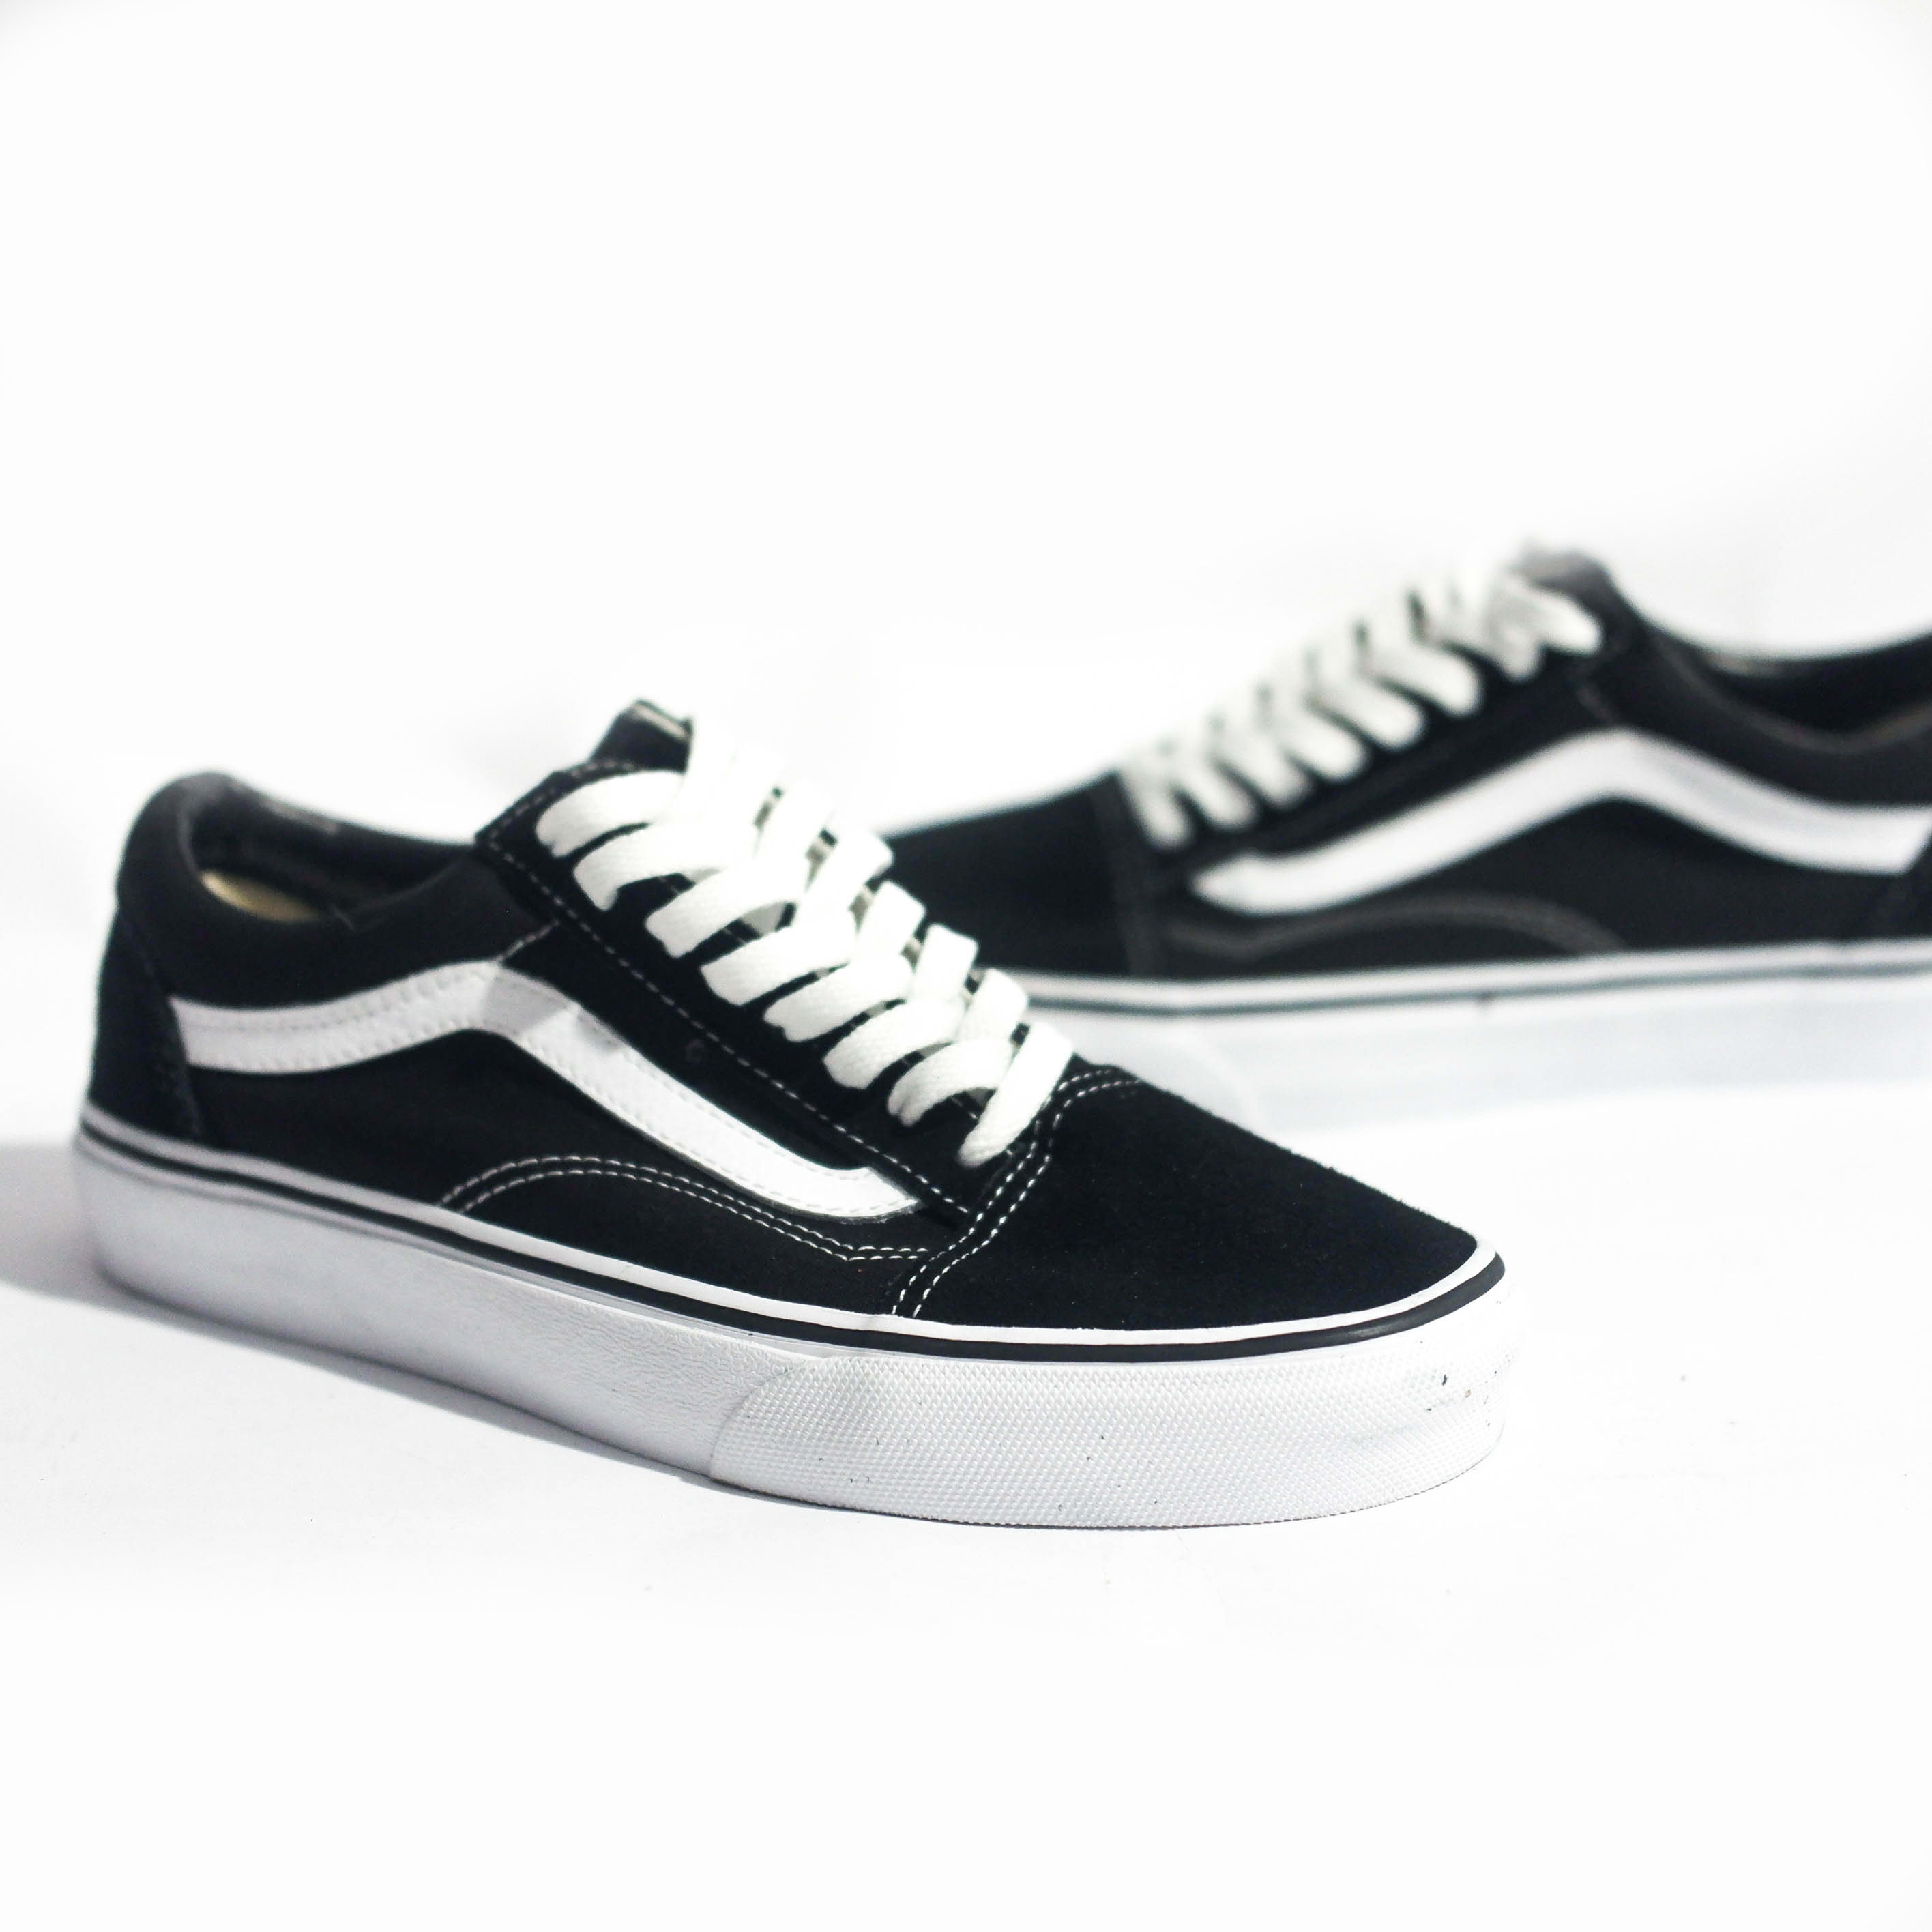 Sneakers shoes vans png by Rioinsanaputra